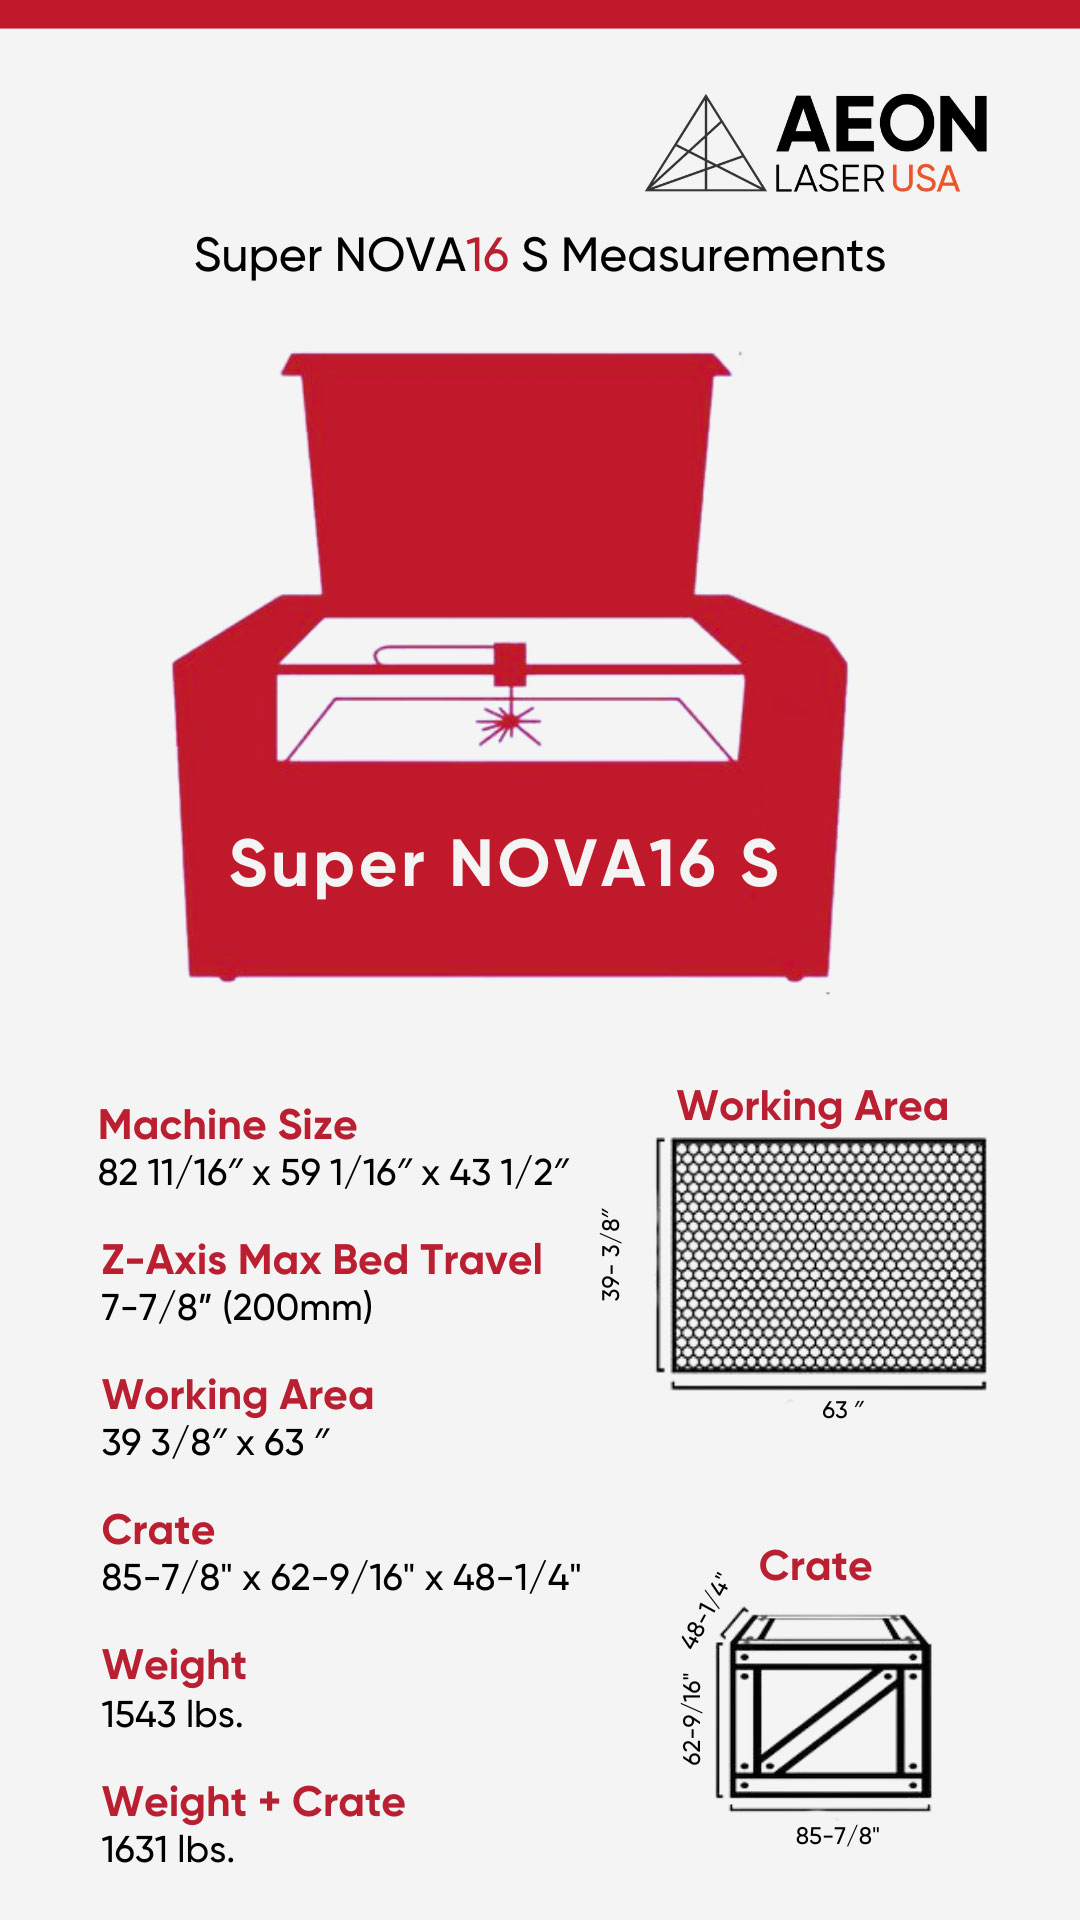 Graphic showing the dimensions of the Super NOVA 16 S laser, crate size, and weight info